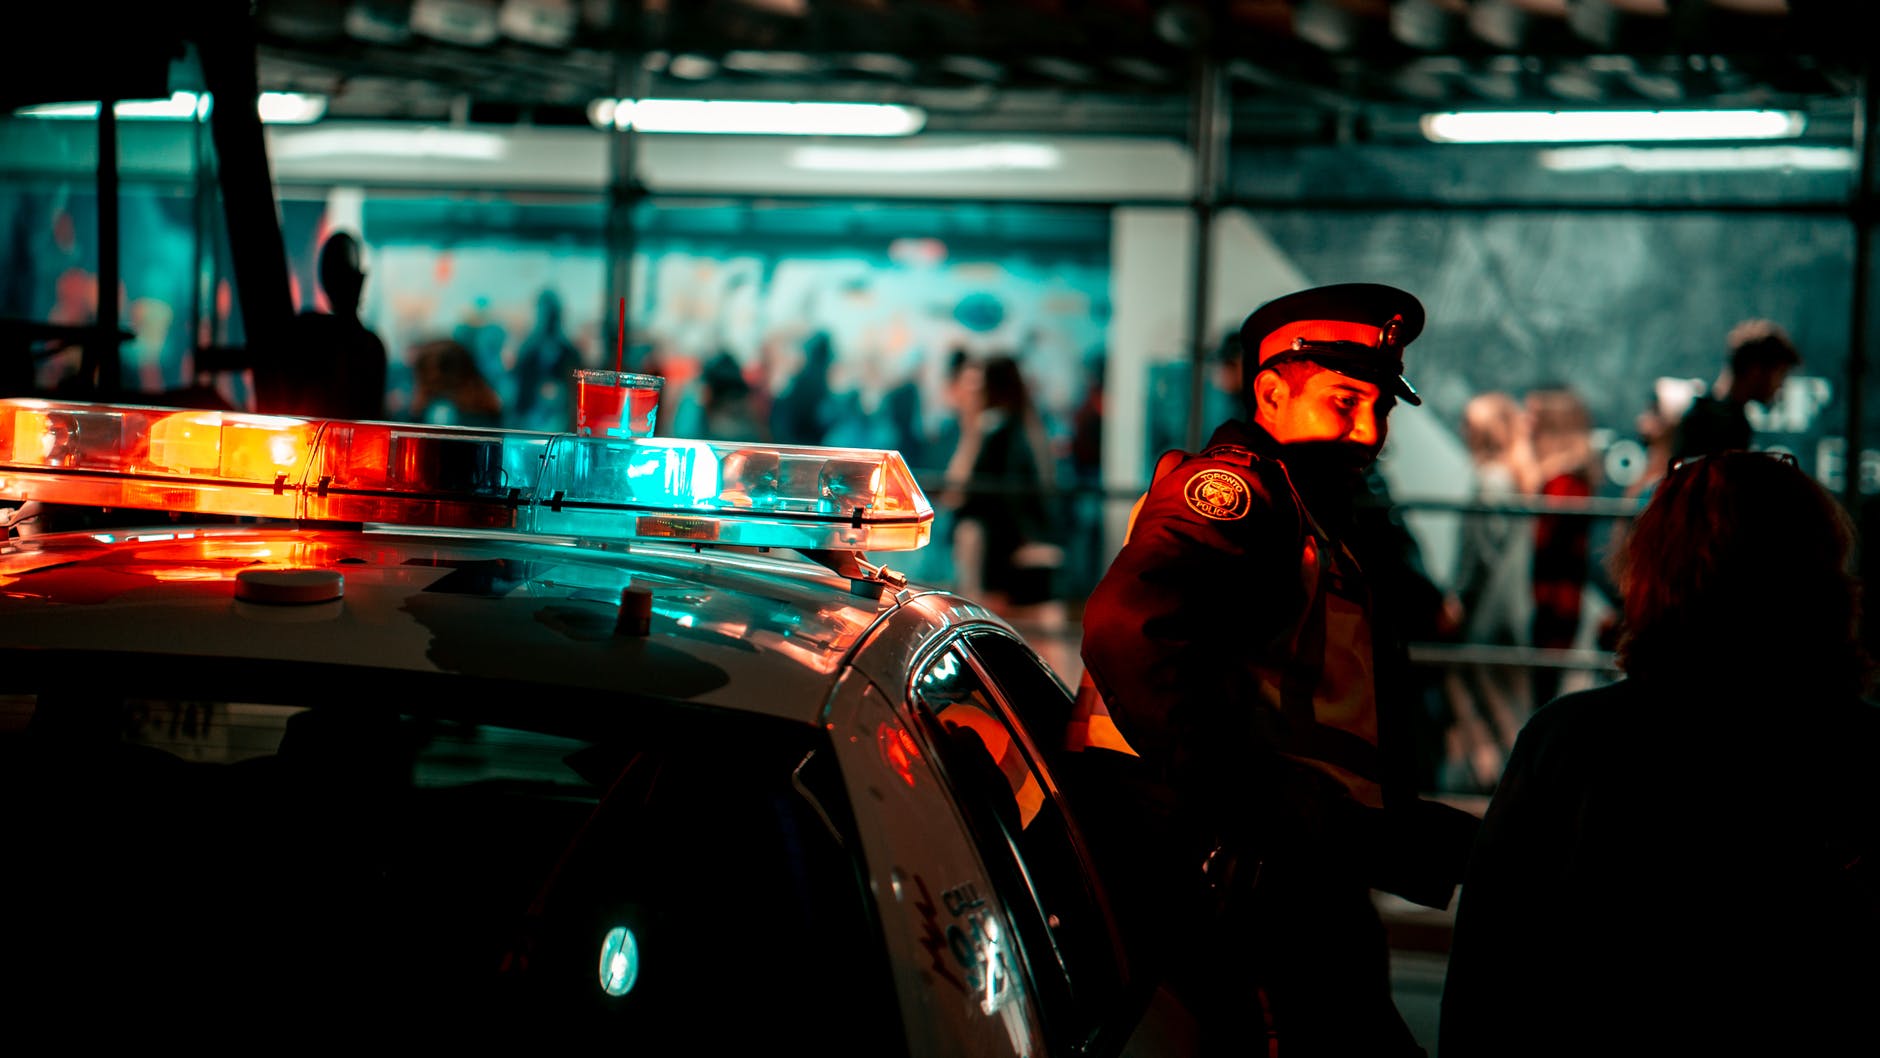 A policeman standing beside his vehicle | Source: Pexels